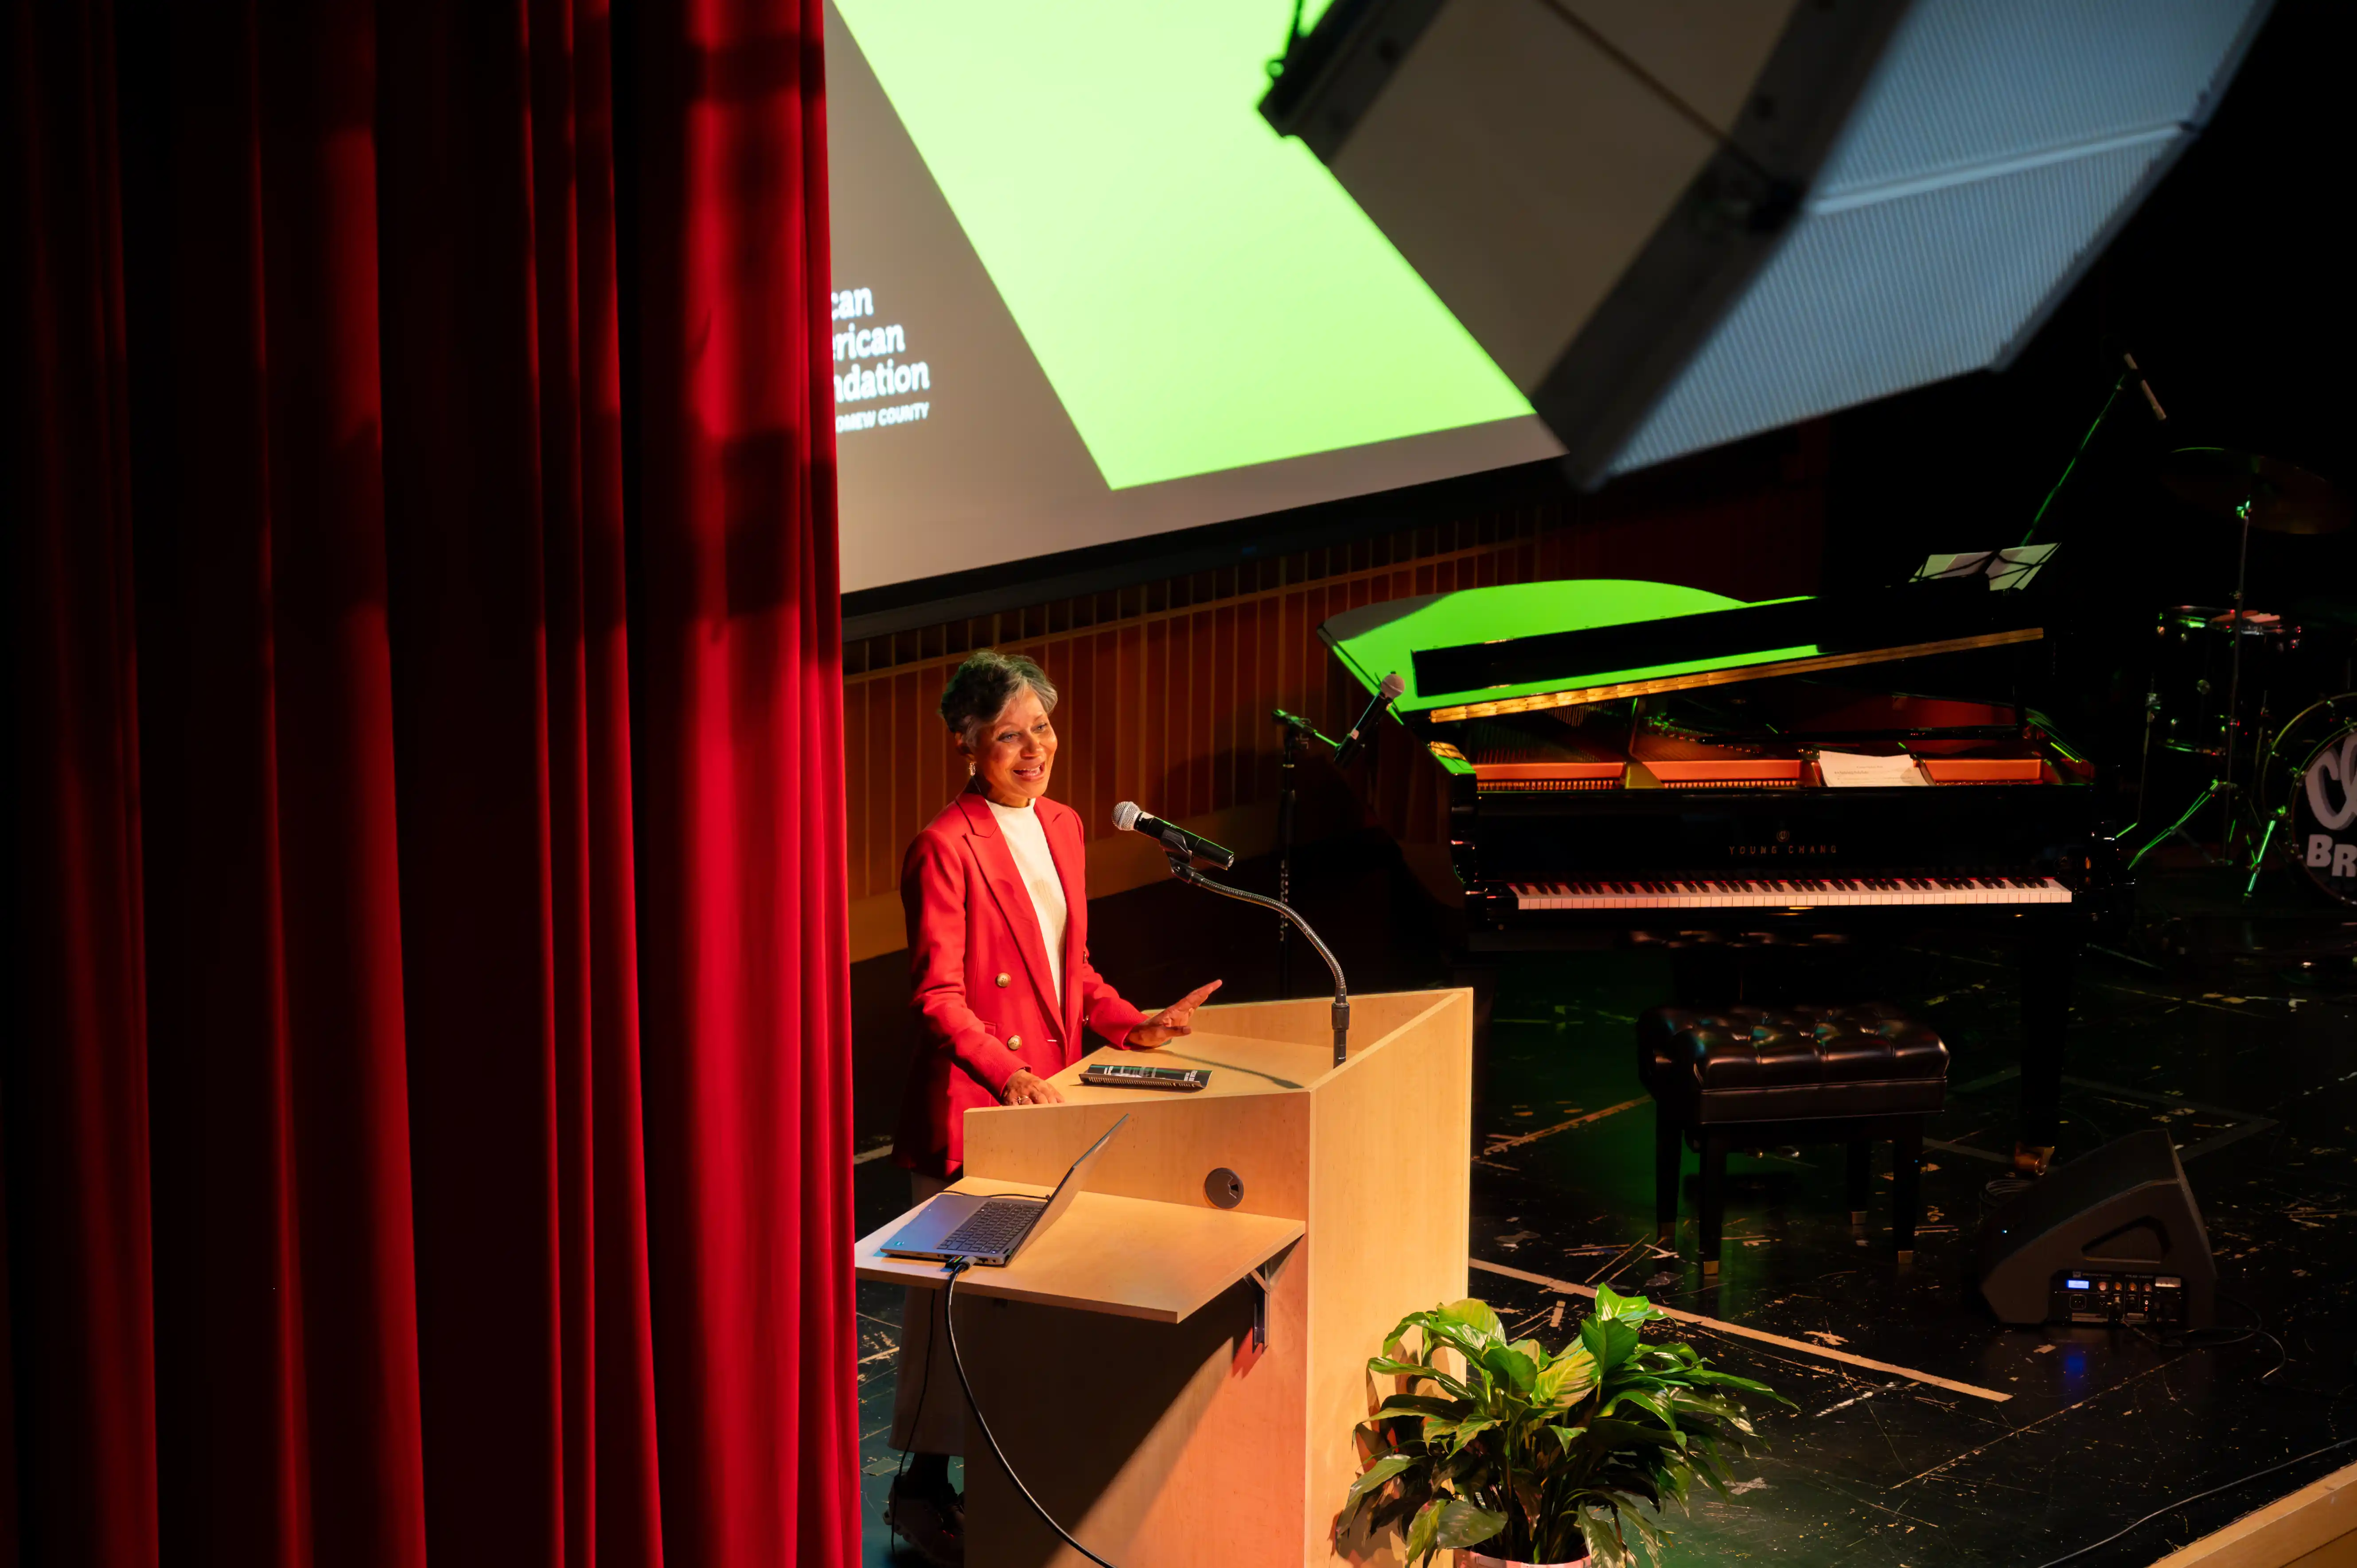 Woman speaking at a podium in an auditorium with a large screen in the background and a grand piano to the side.